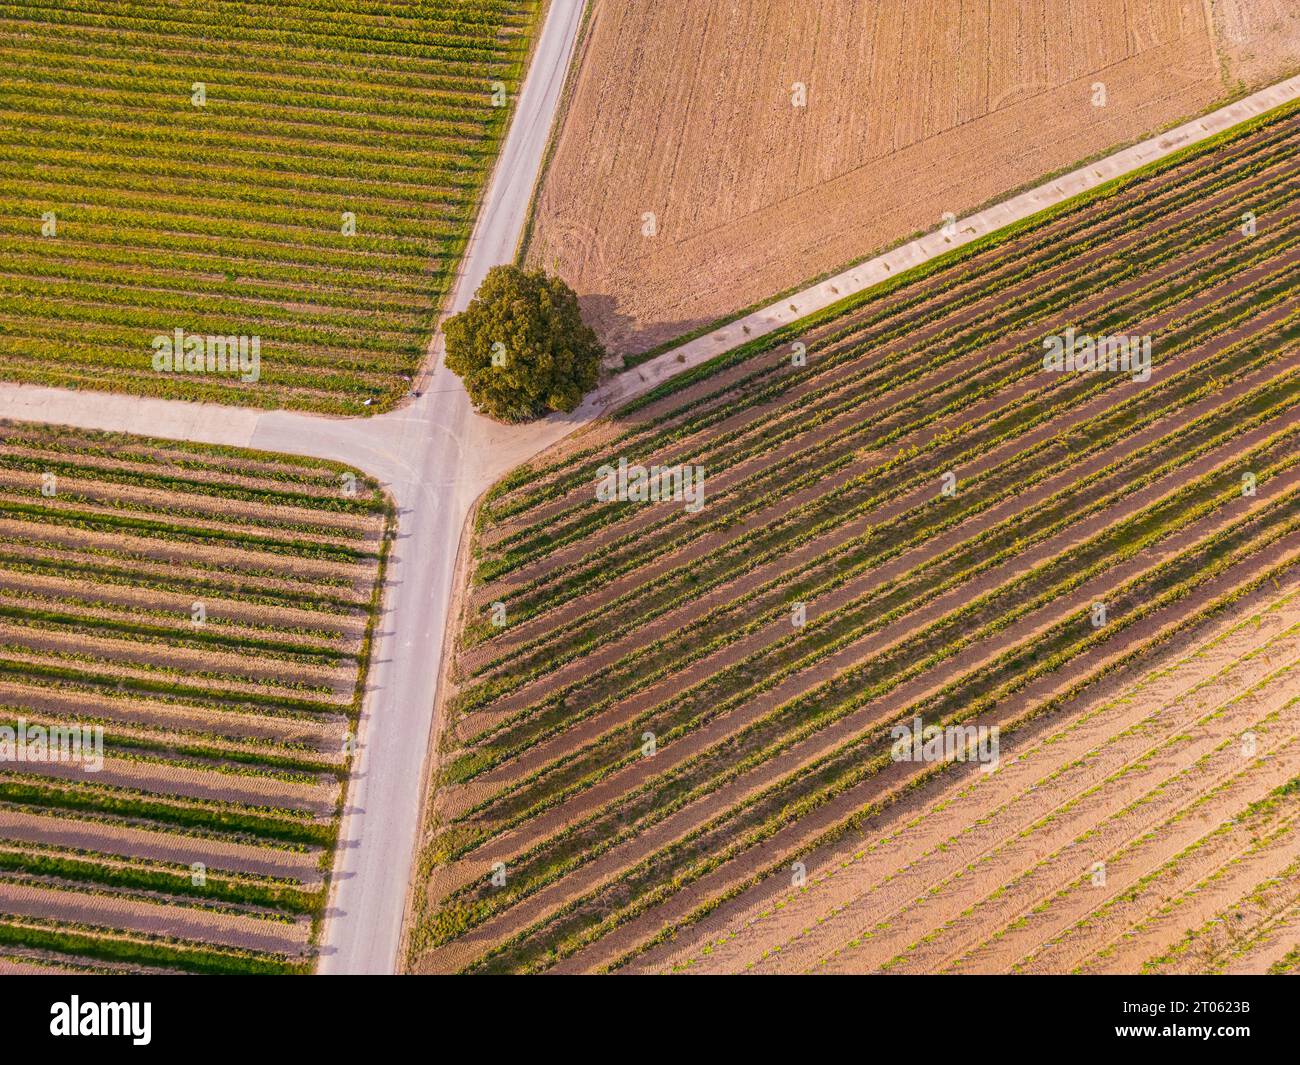 Rural area field paths with tree and rows of vines in a vineyard area Stock Photo